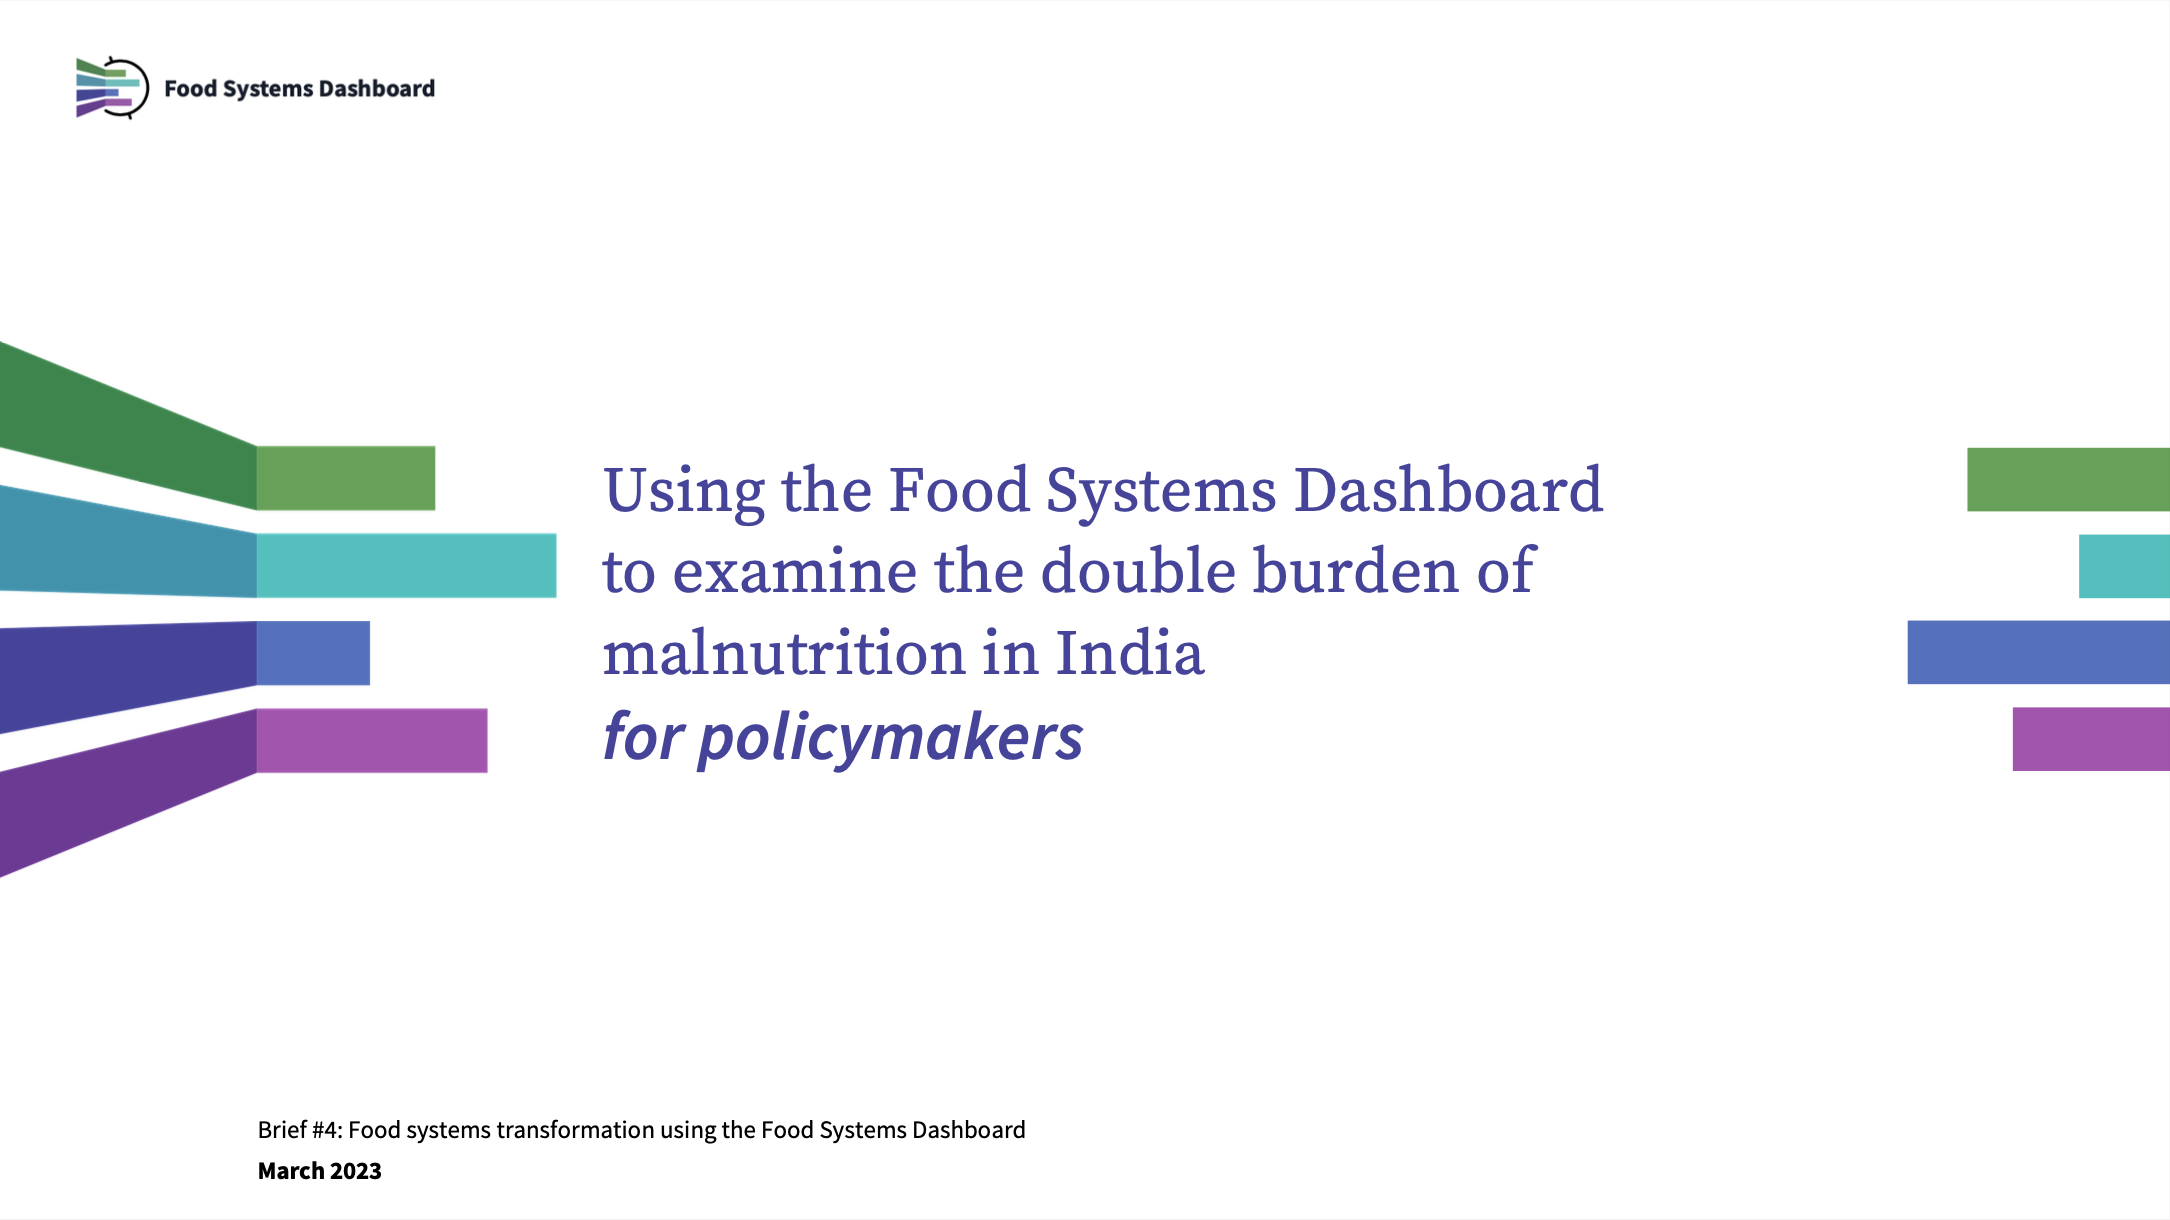 Using the Food Systems Dashboard to examine the double burden of malnutrition in India